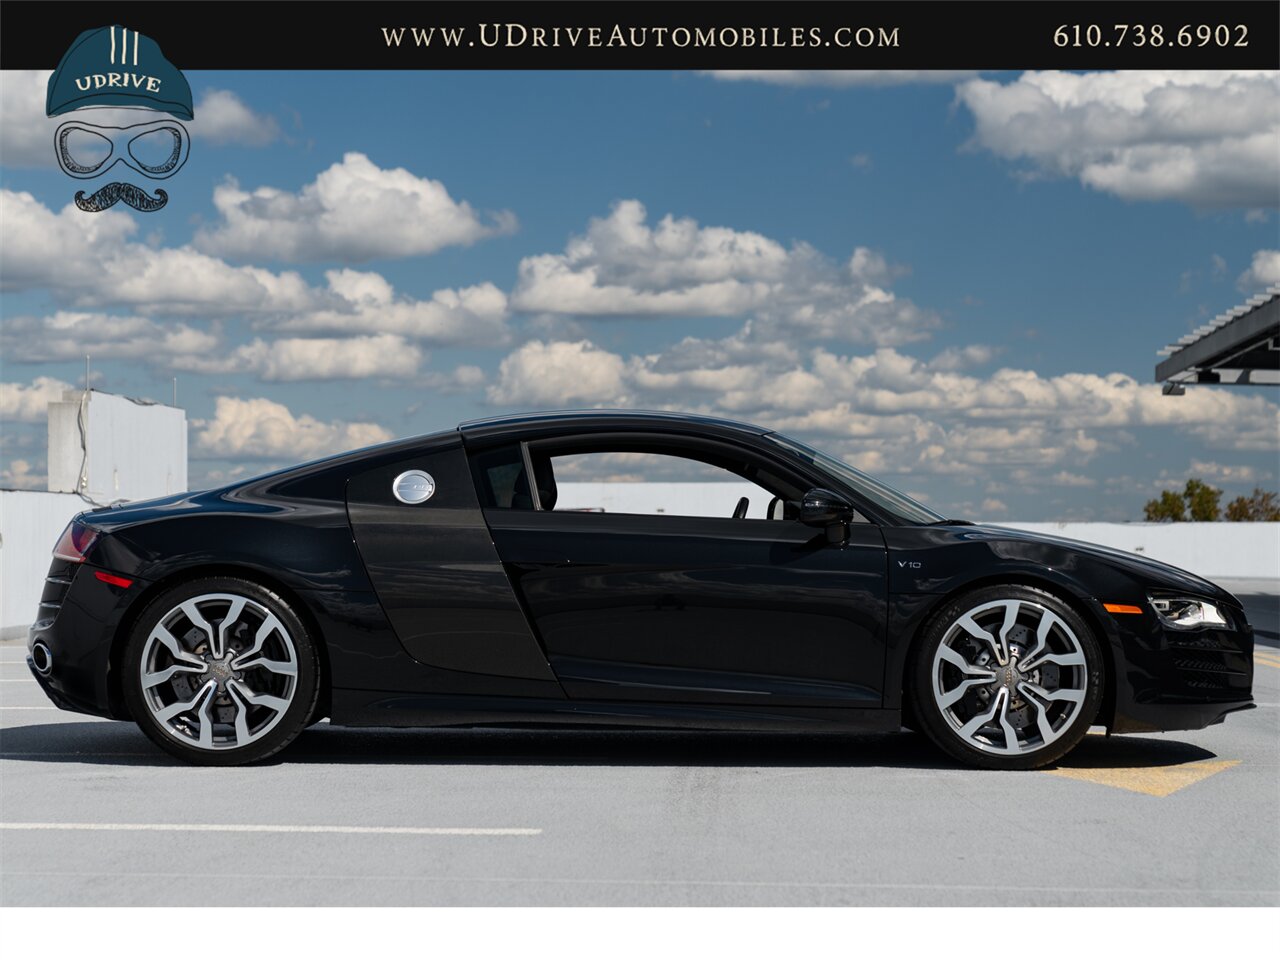 2011 Audi R8 5.2 Quattro  V10 6 Speed Manual - Photo 17 - West Chester, PA 19382